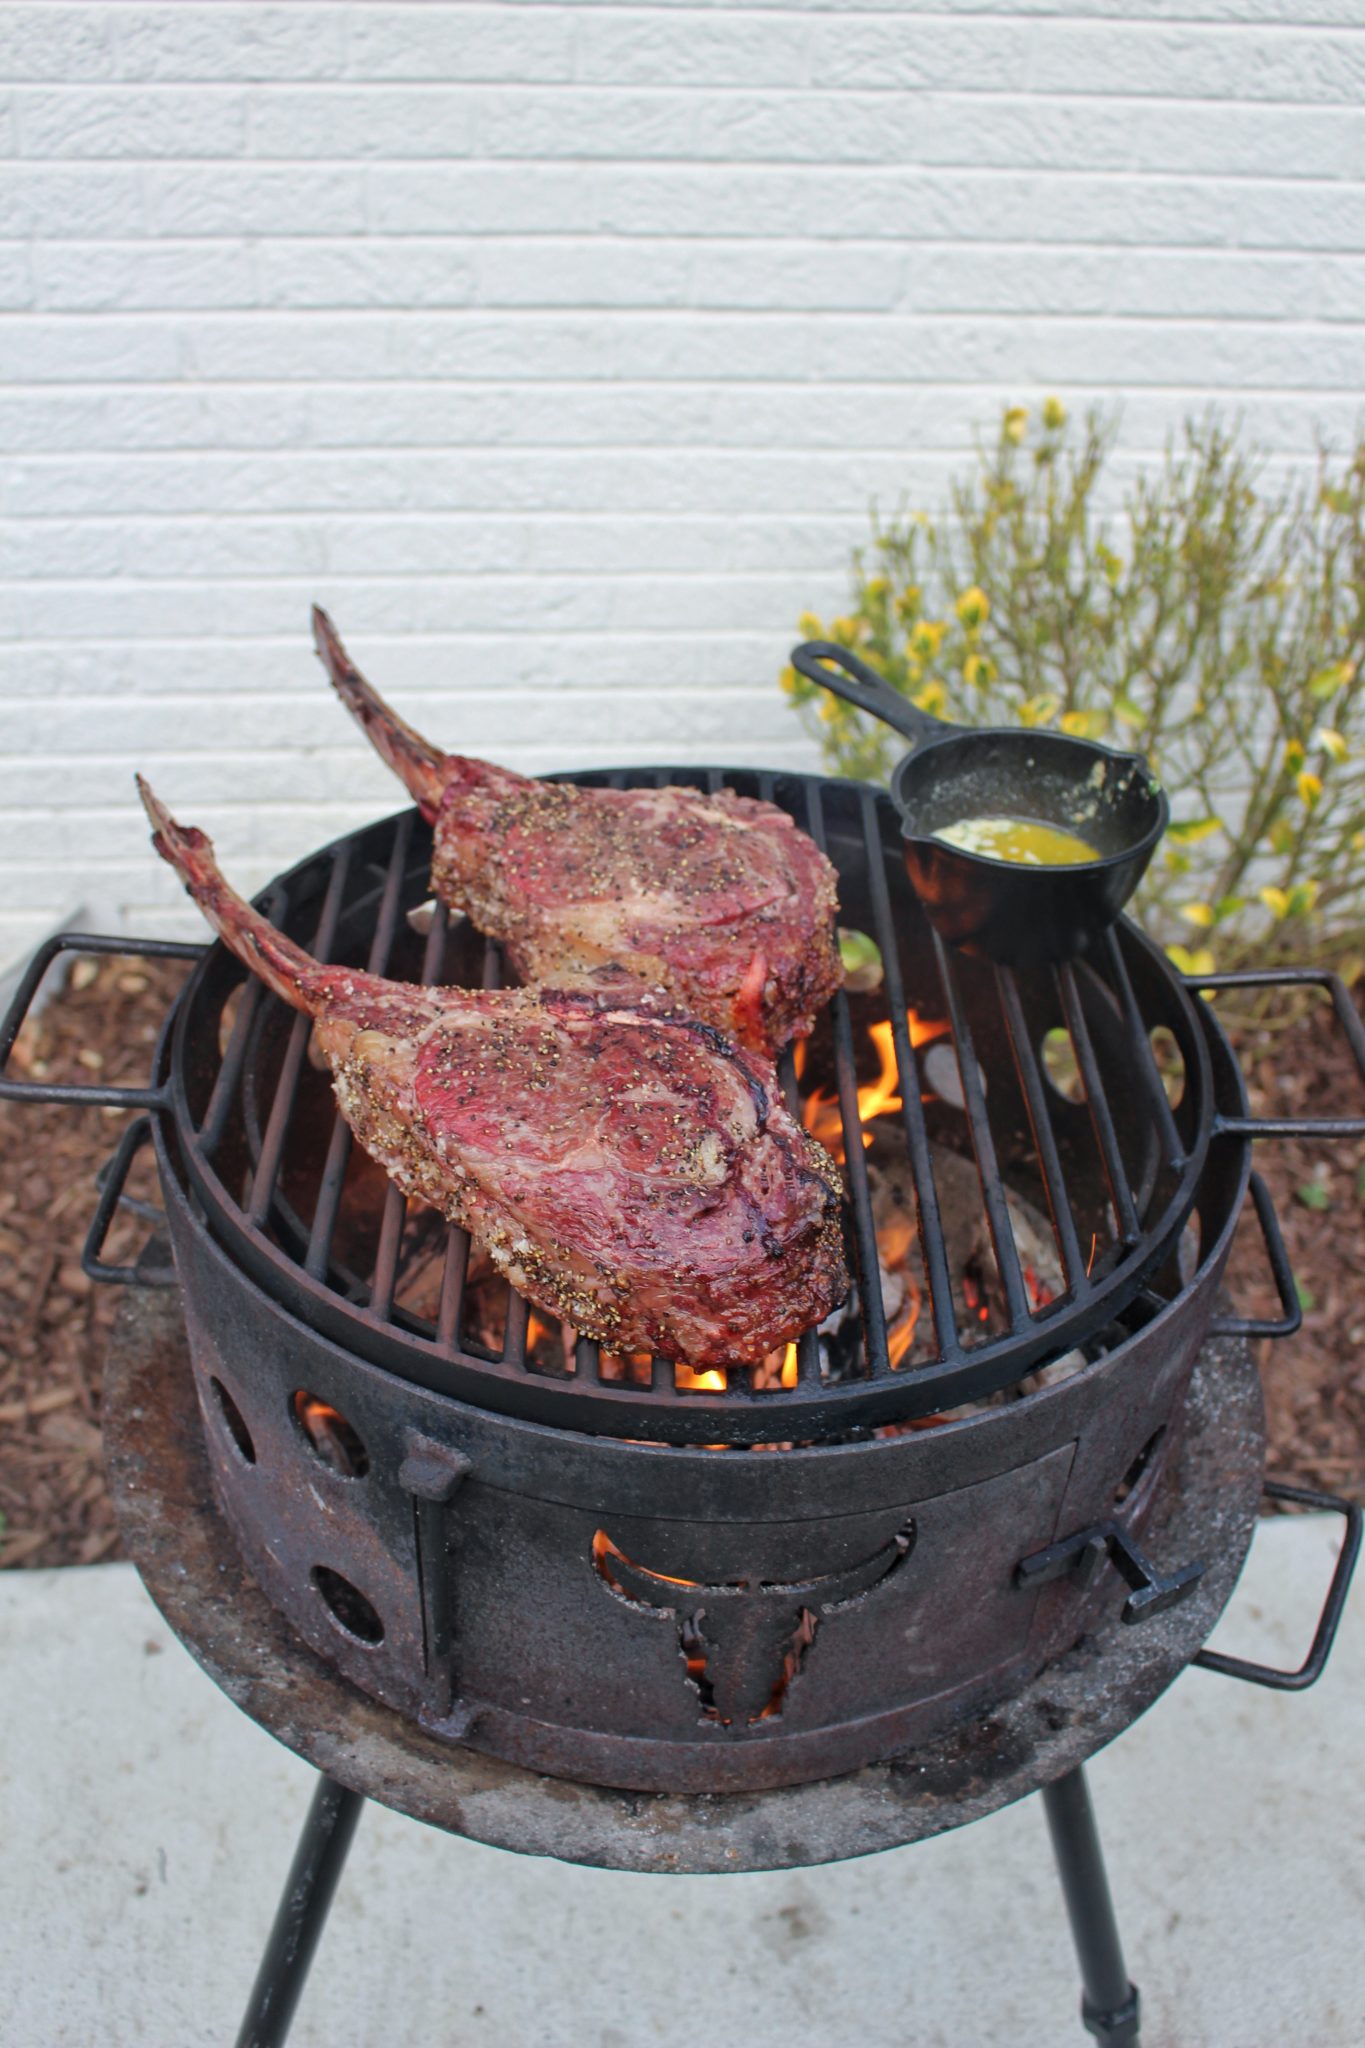 Hanging the Tomahawk Steaks